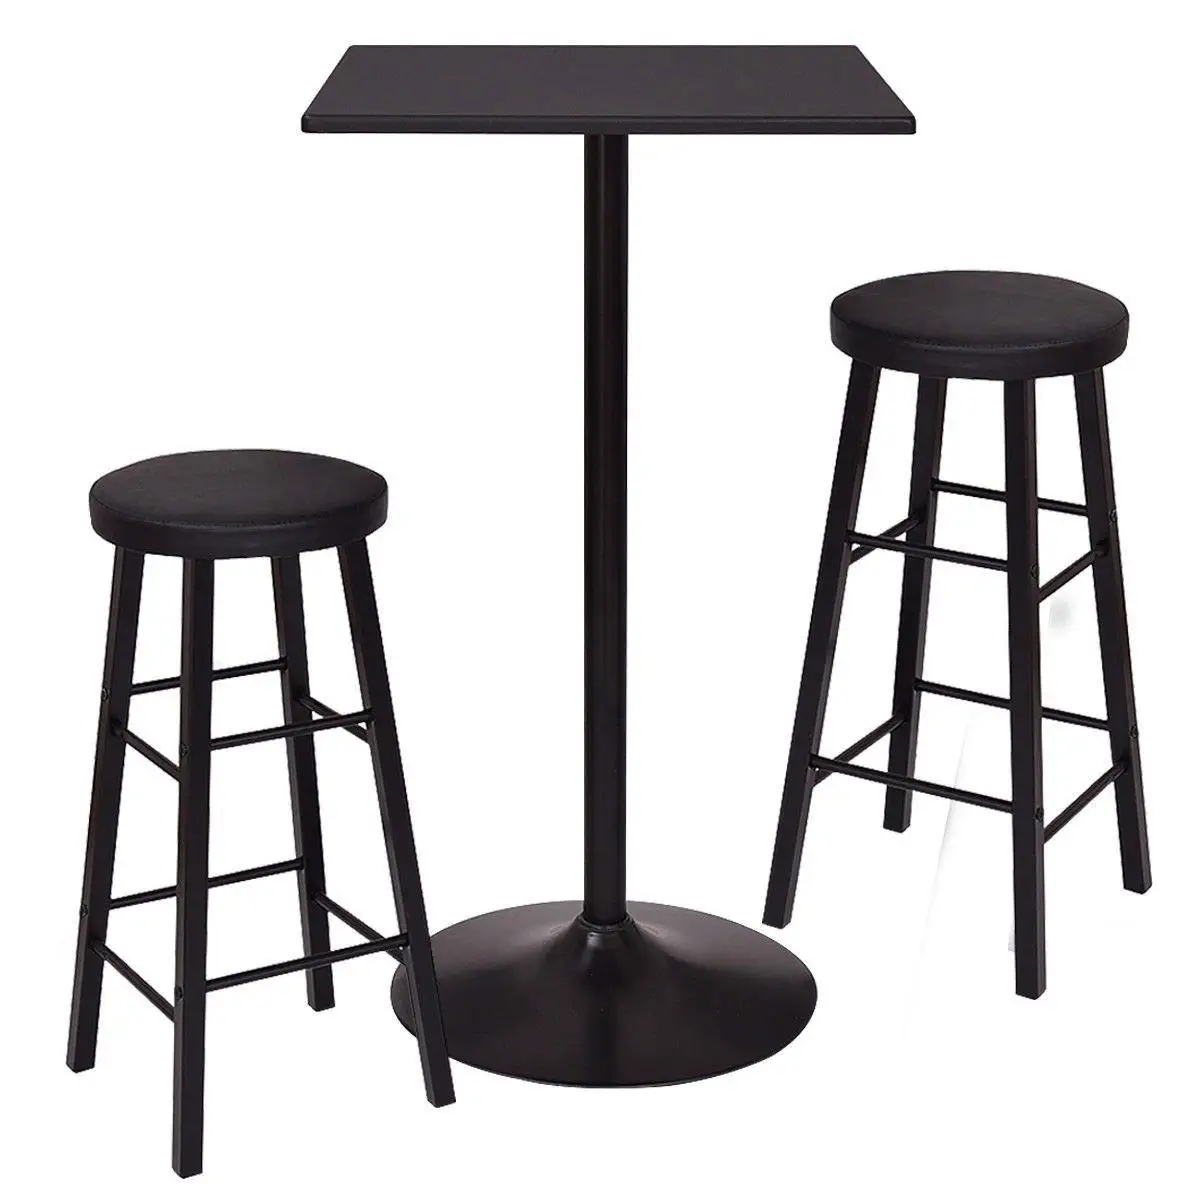 Cheap Kitchen Bar Stools For Sale, find Kitchen Bar Stools For Sale